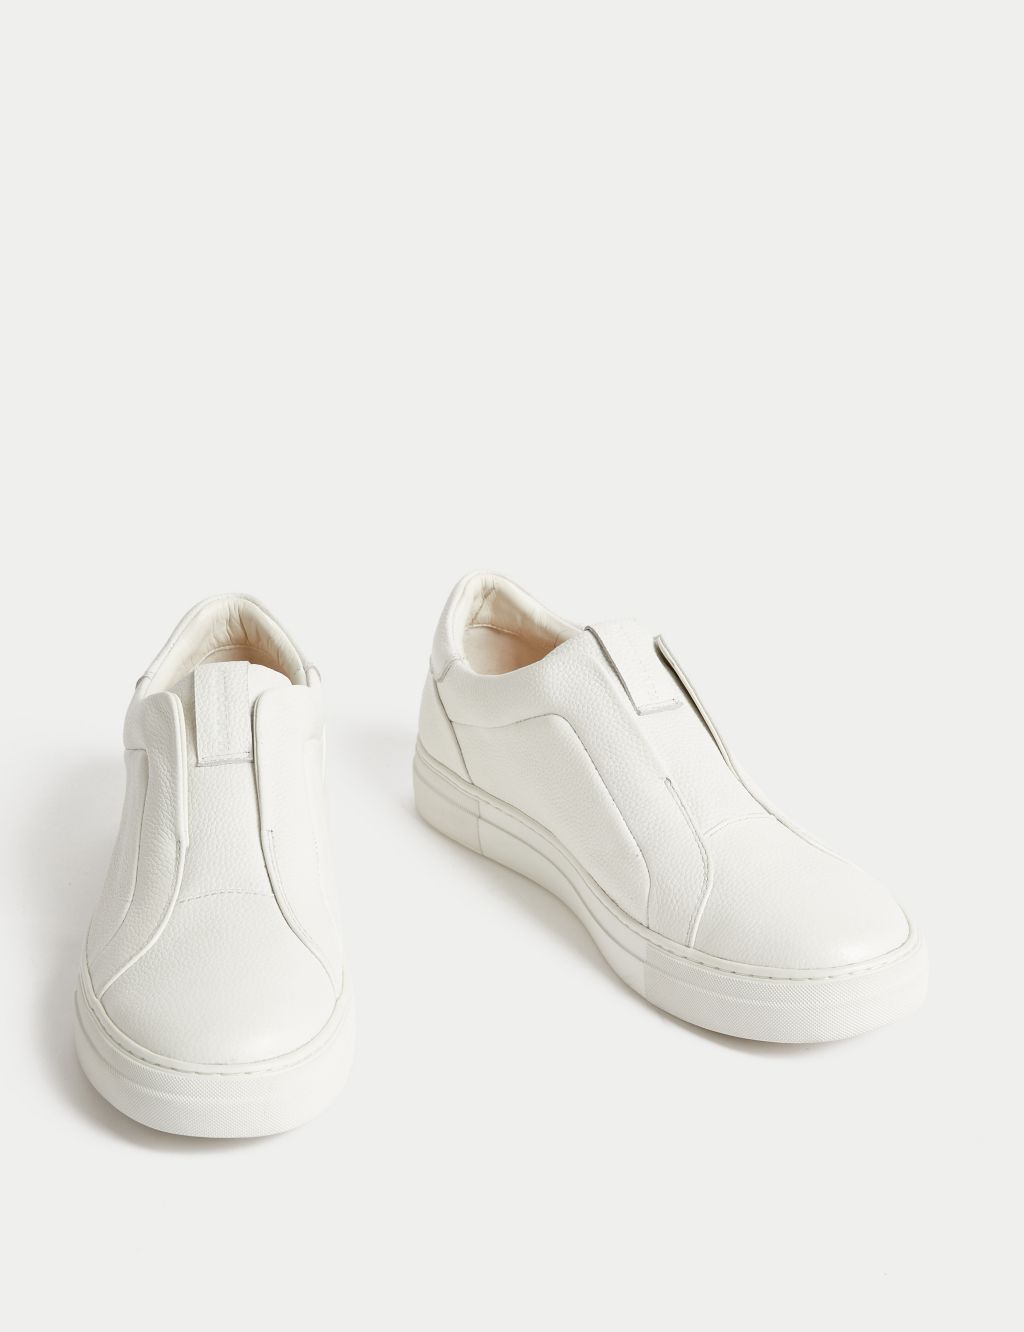 Leather Slip-On Cupsole Trainers image 2